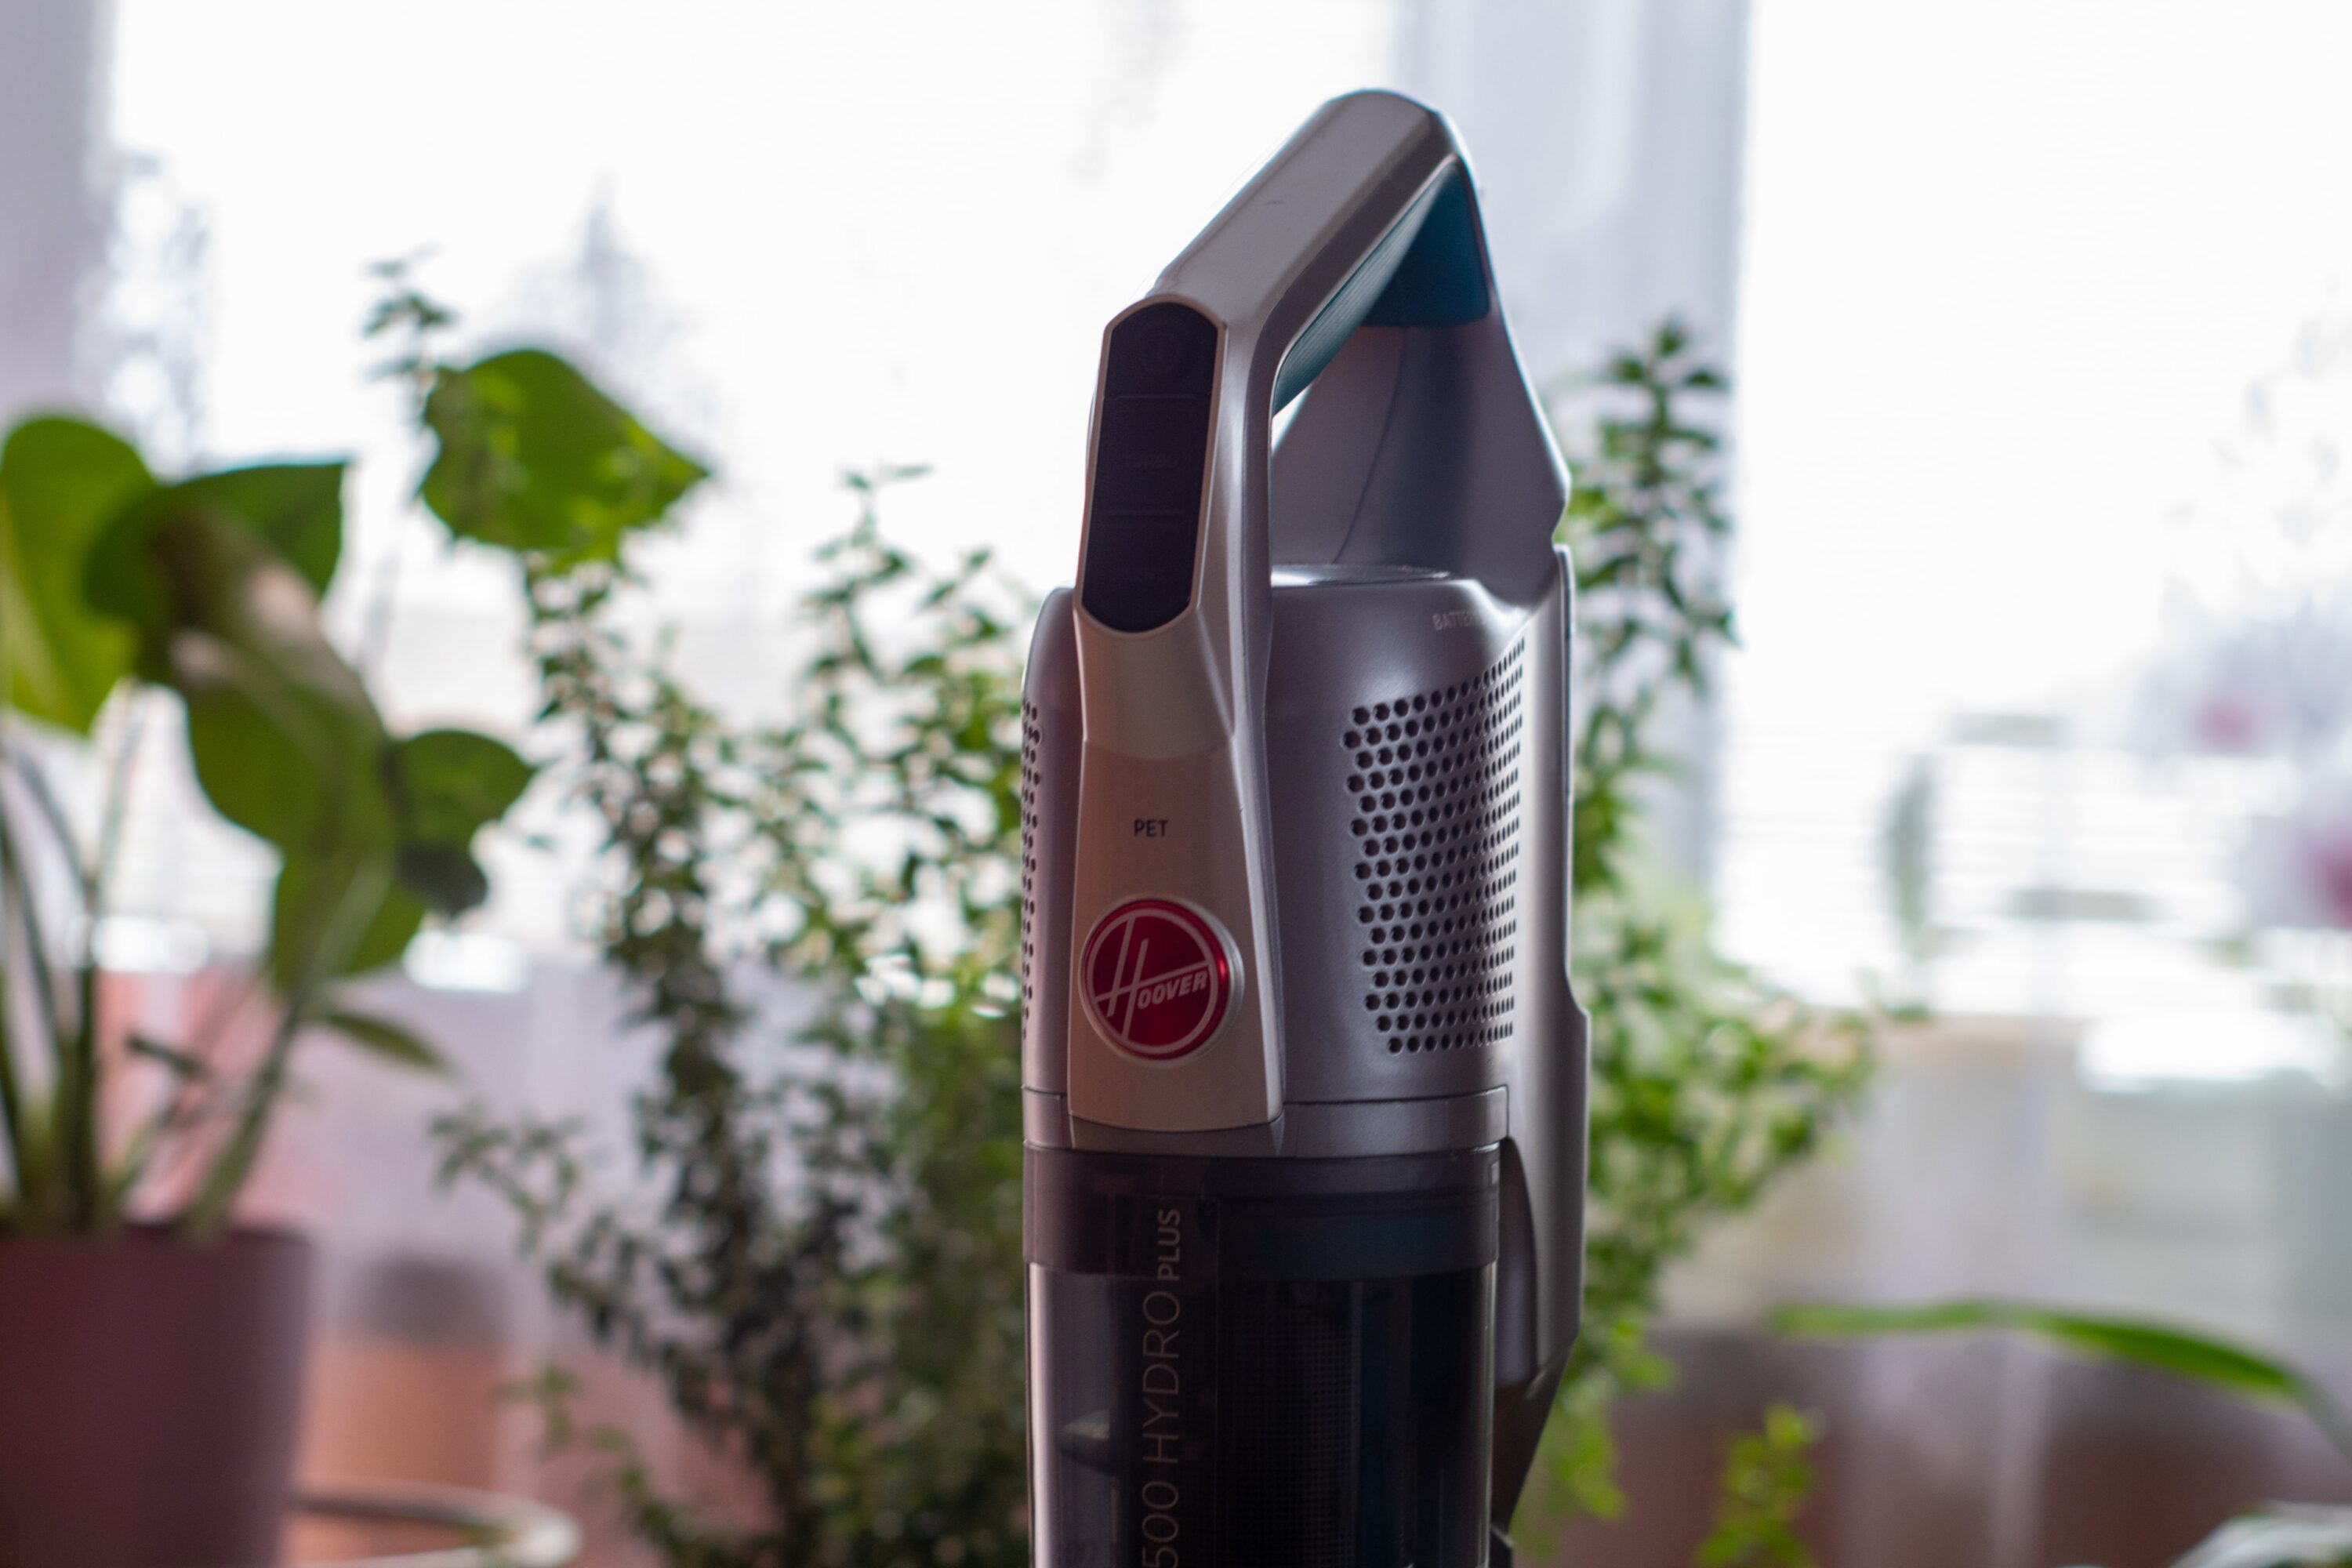 Hoover H-Free 500 Hydro Plus